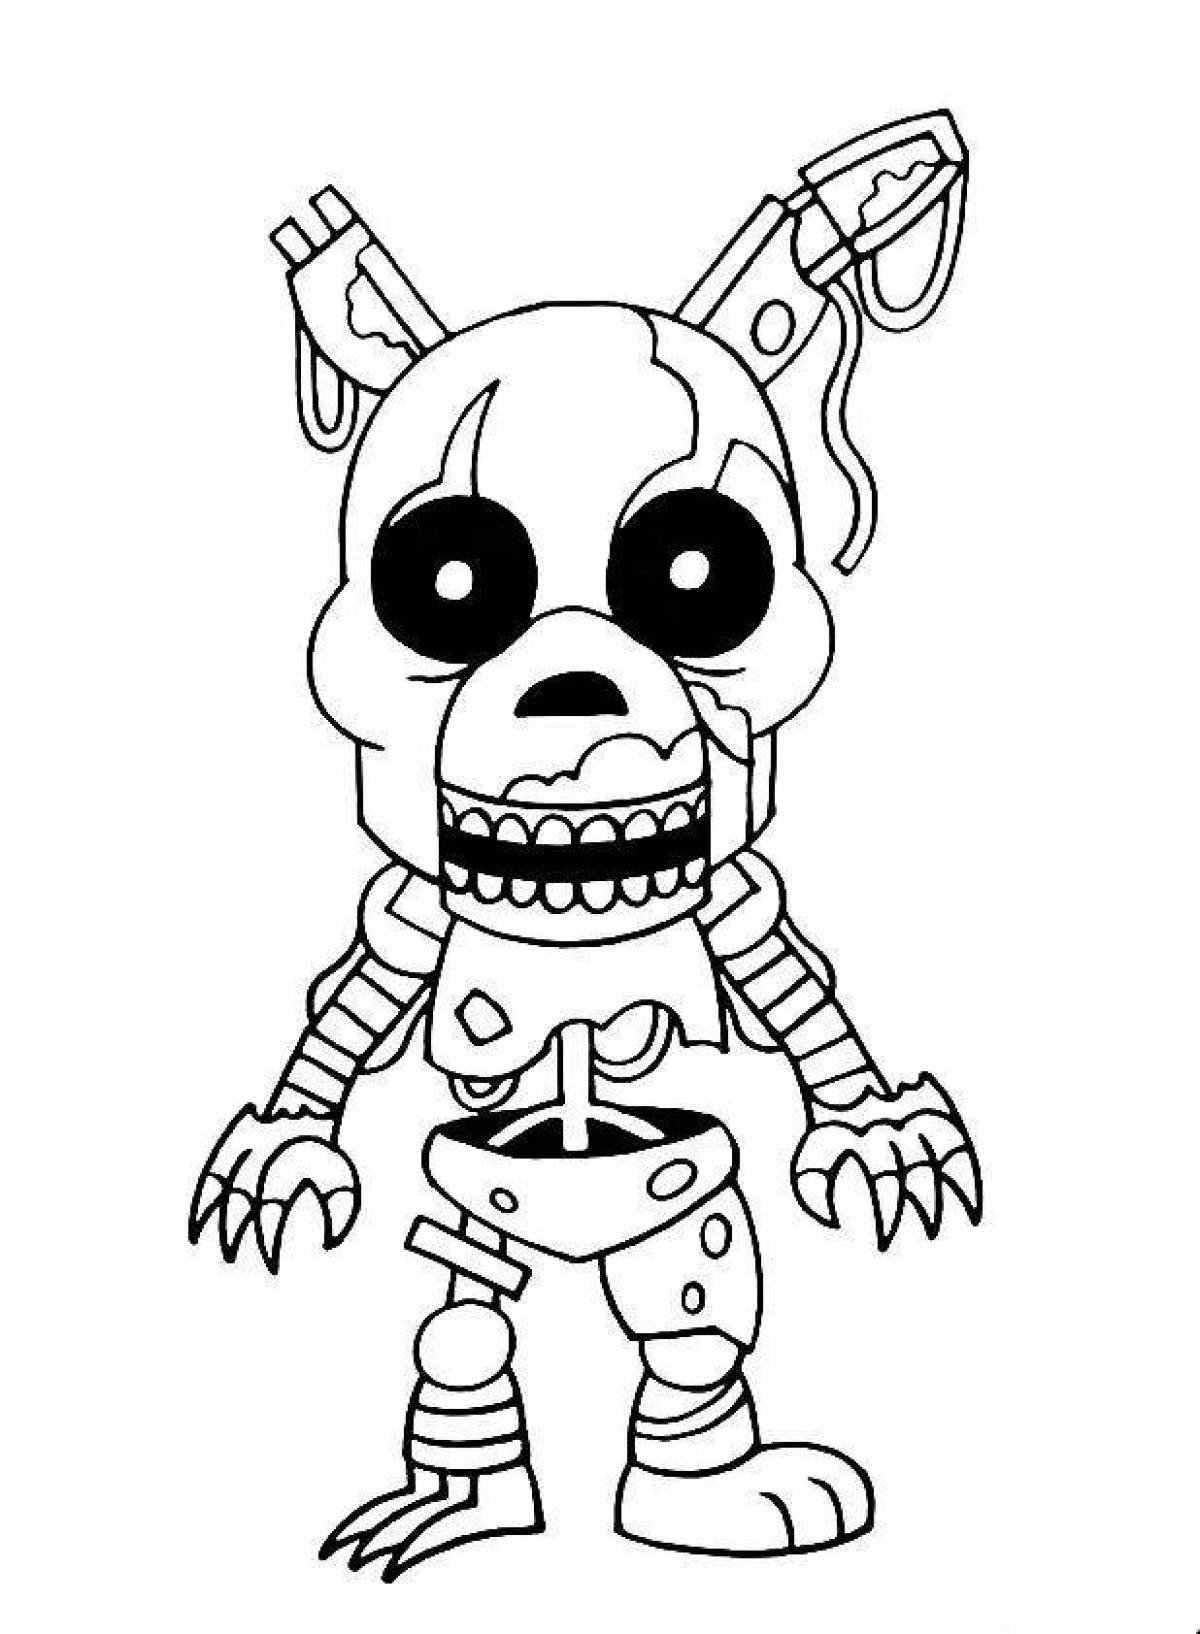 Tempting fnaf security breach coloring page